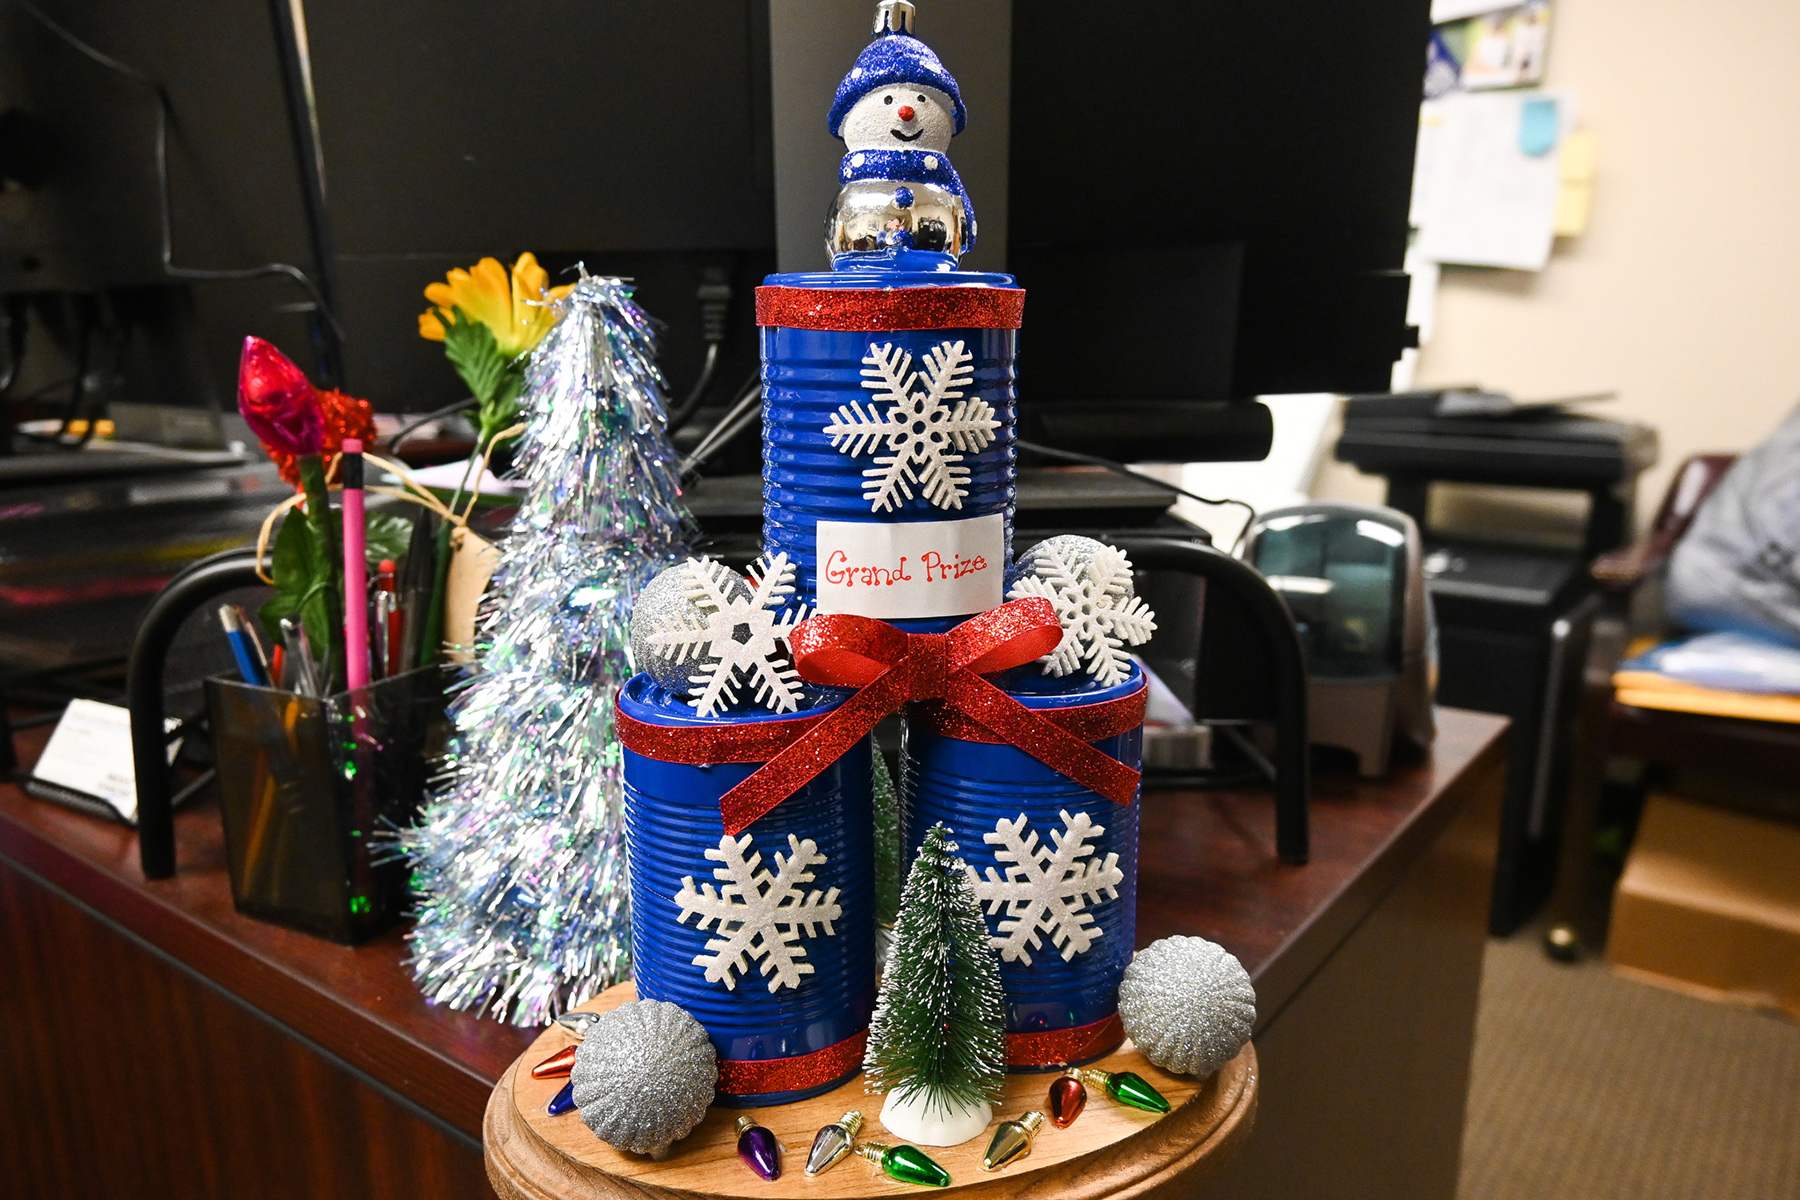 Staff at Middle Tennessee State University’s Health and Human Performance department created a True Blue-style trophy awarded to the winner of the department’s holiday door décor competition that wrapped up on Thursday, Dec. 1, 2022. (MTSU photo by Stephanie Wagner)